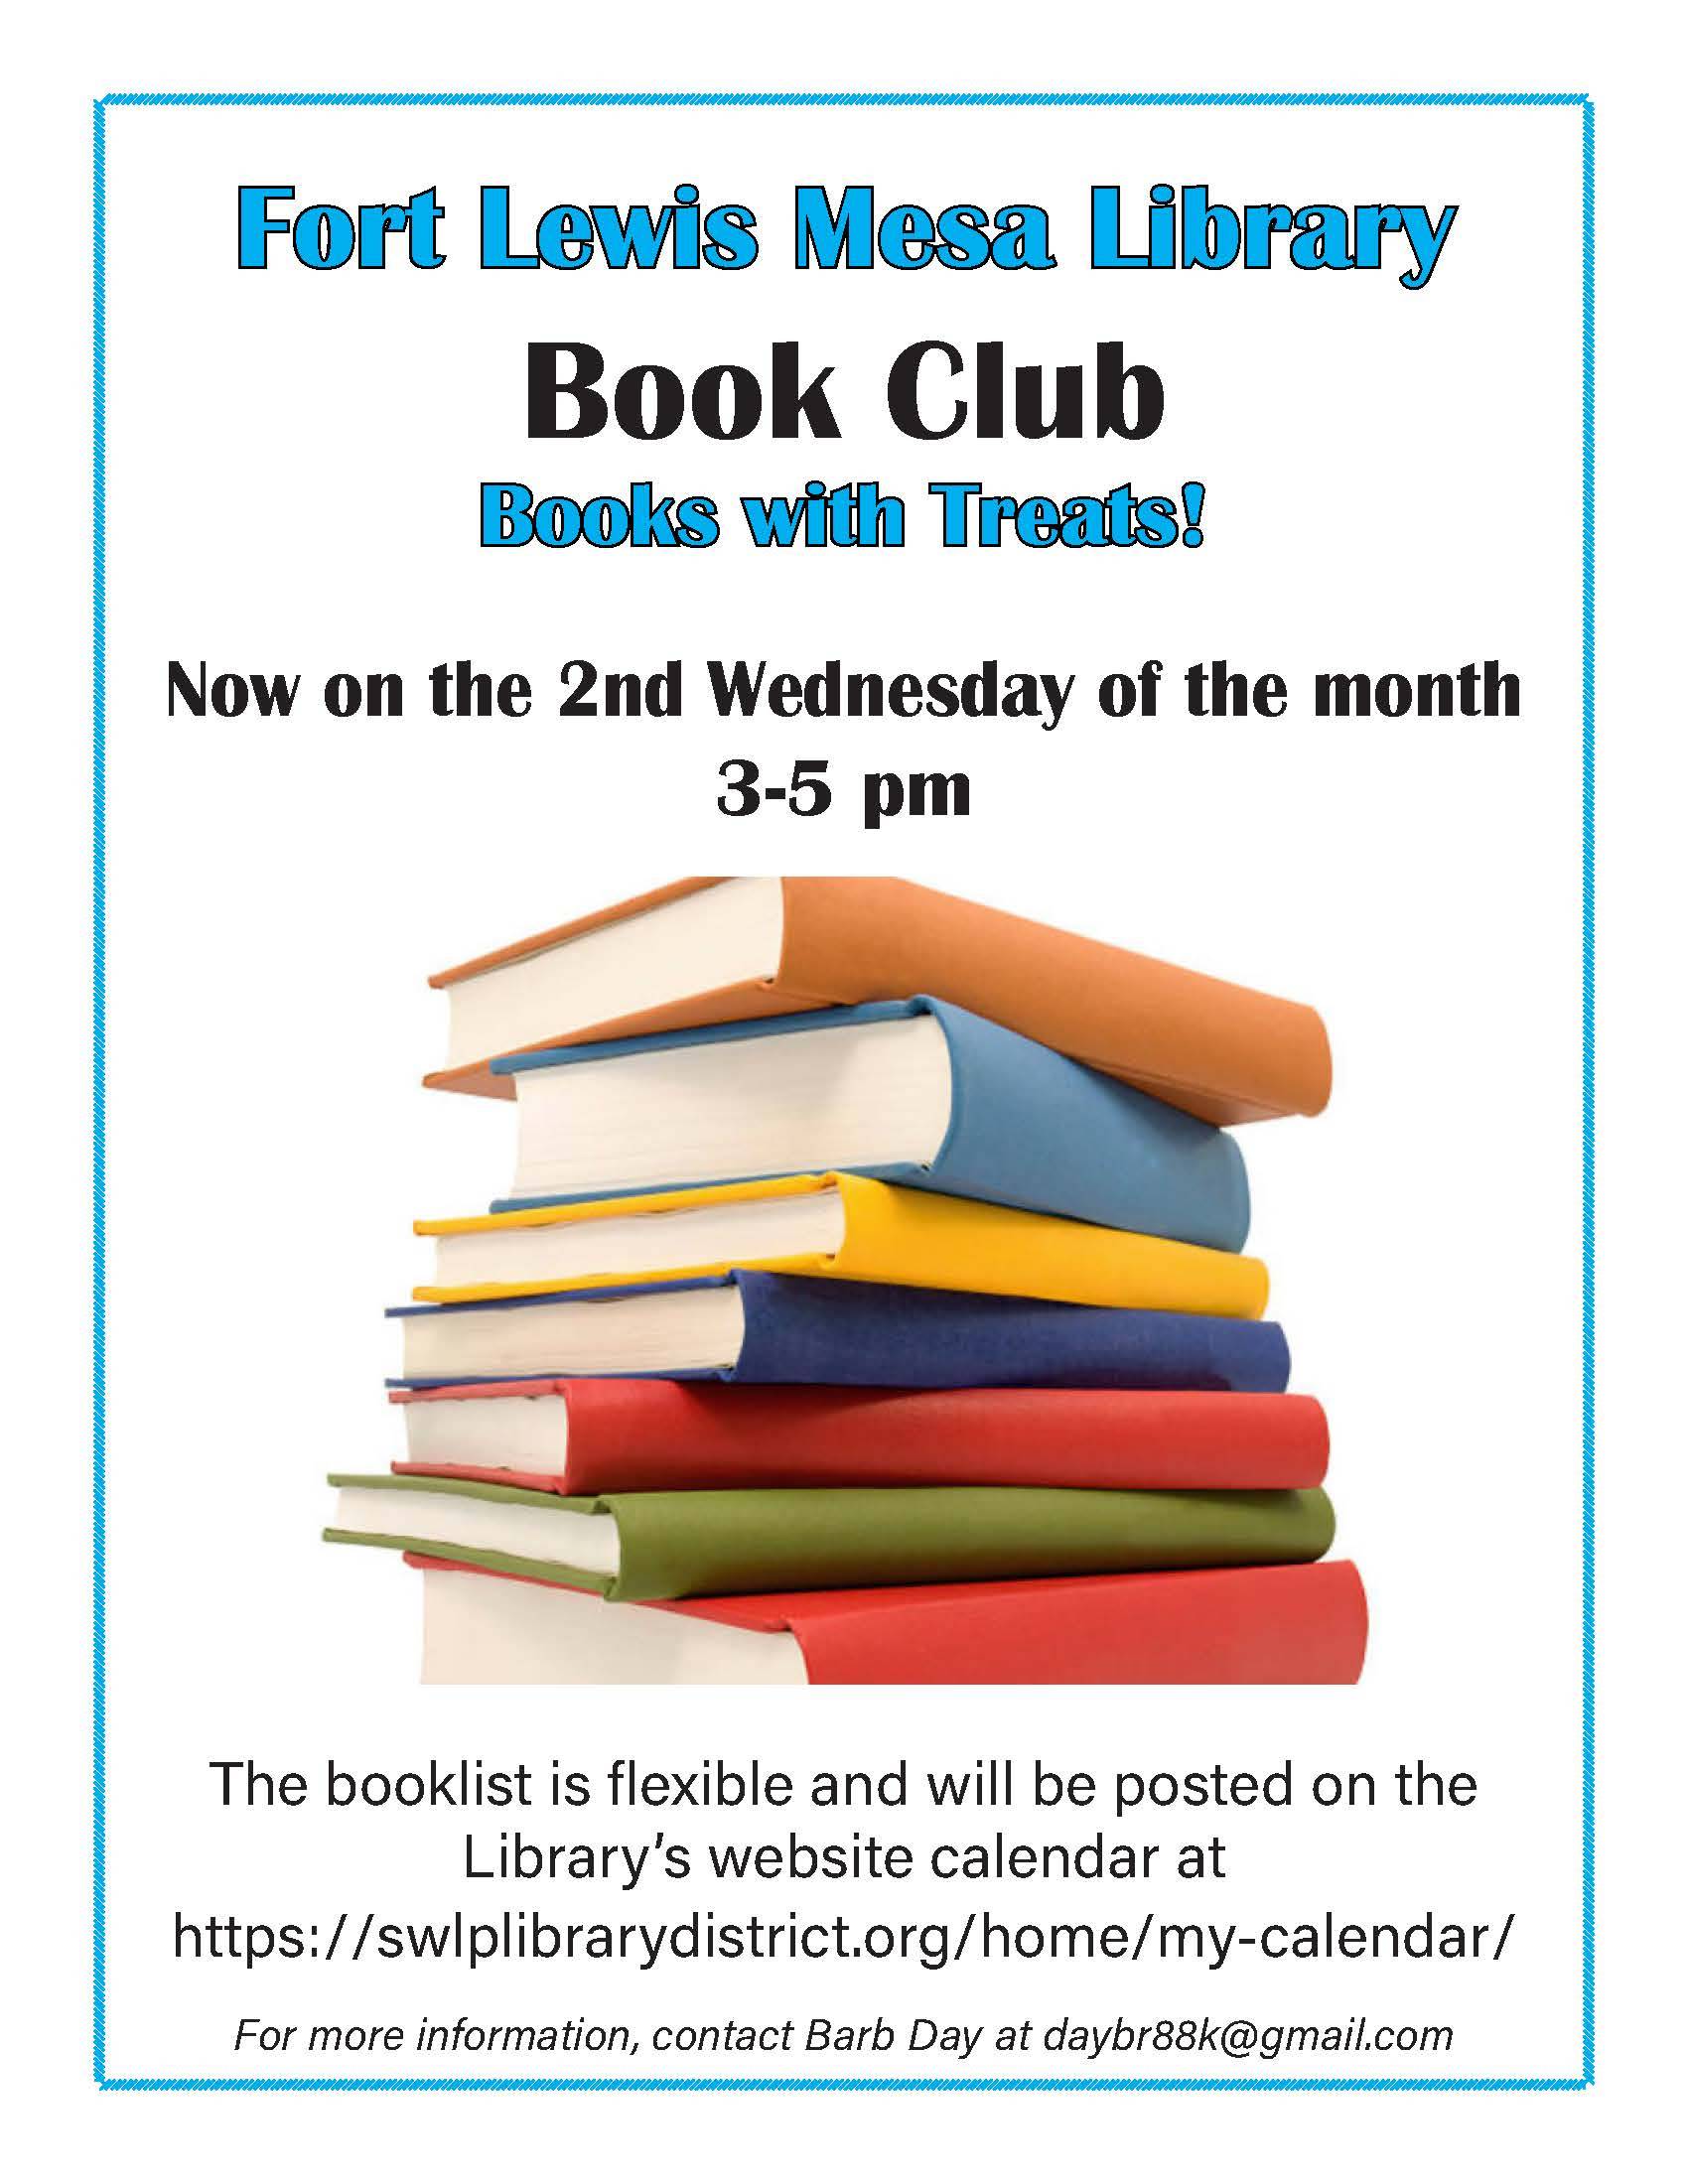 a pile of colorful books with the text "Fort Lewis Mesa Book Club, Now on the 2nd Wednesday of the month, 3-5 pm